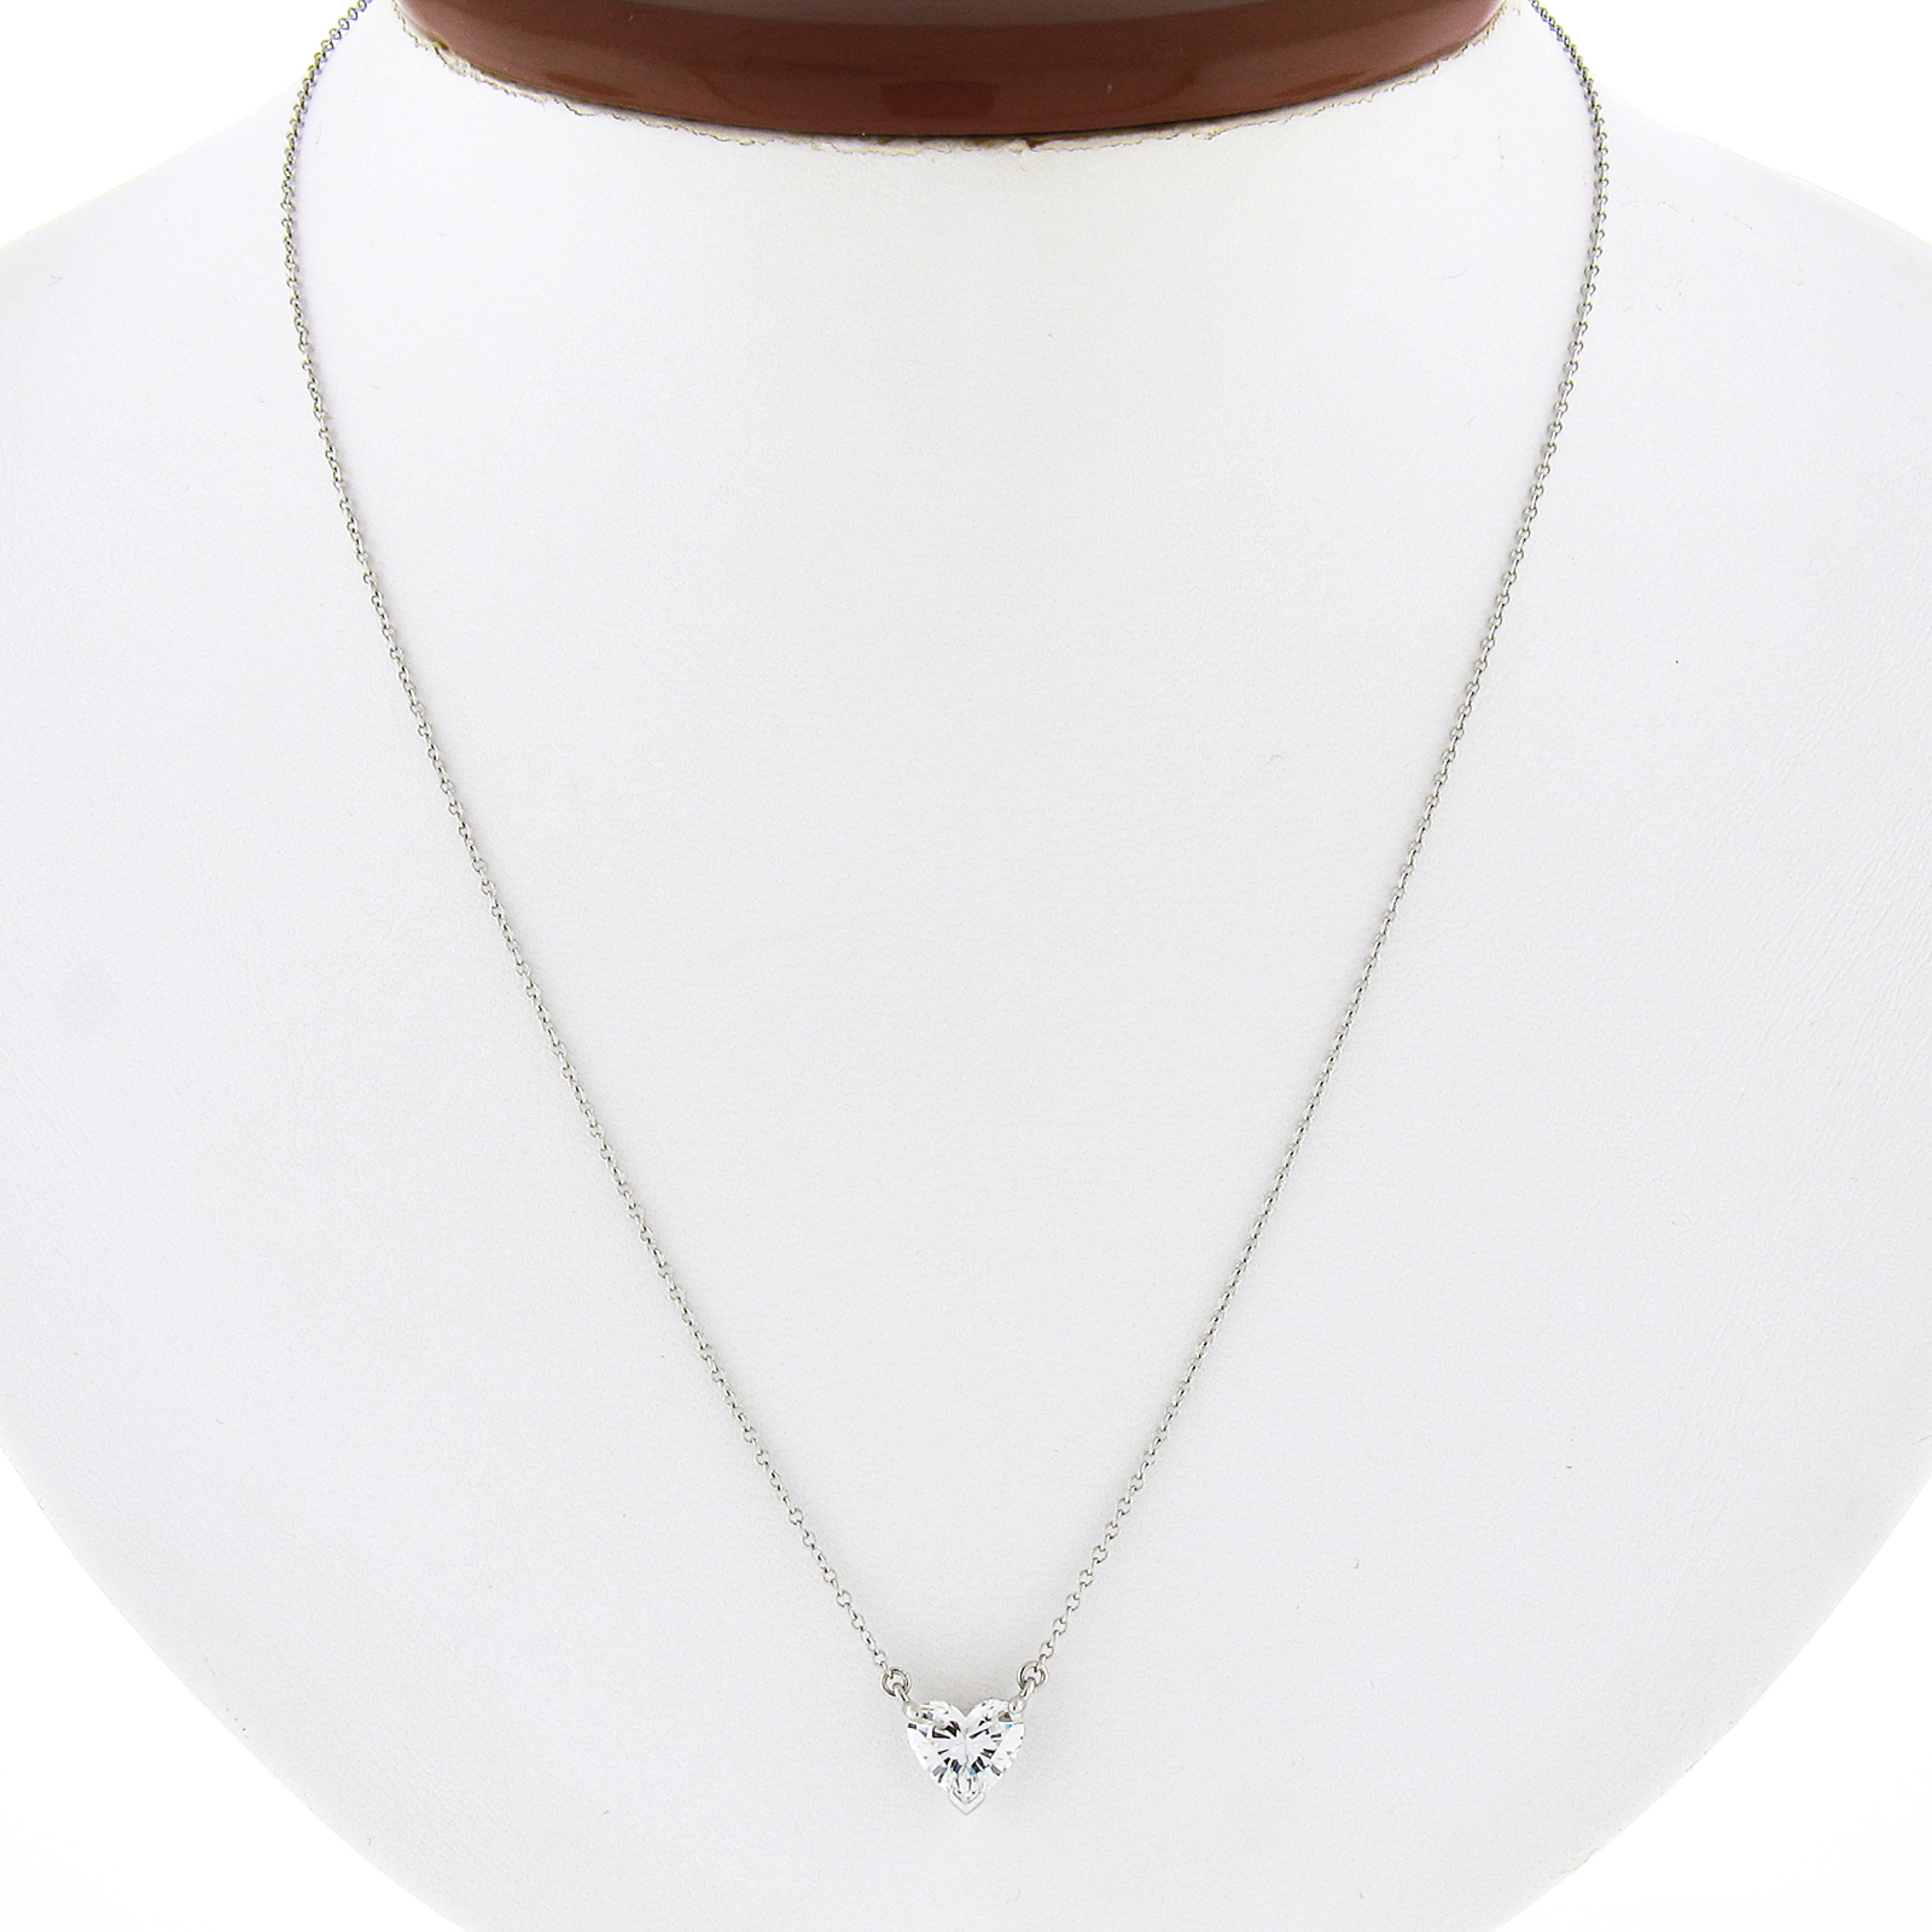 This classic and absolutely stunning heart diamond solitaire pendant by Tiffany & Co. is crafted in solid platinum and features brilliant heart cut diamond prong set at the simple and elegantly designed basket. This 1.08 carat diamond is pure FIRE!